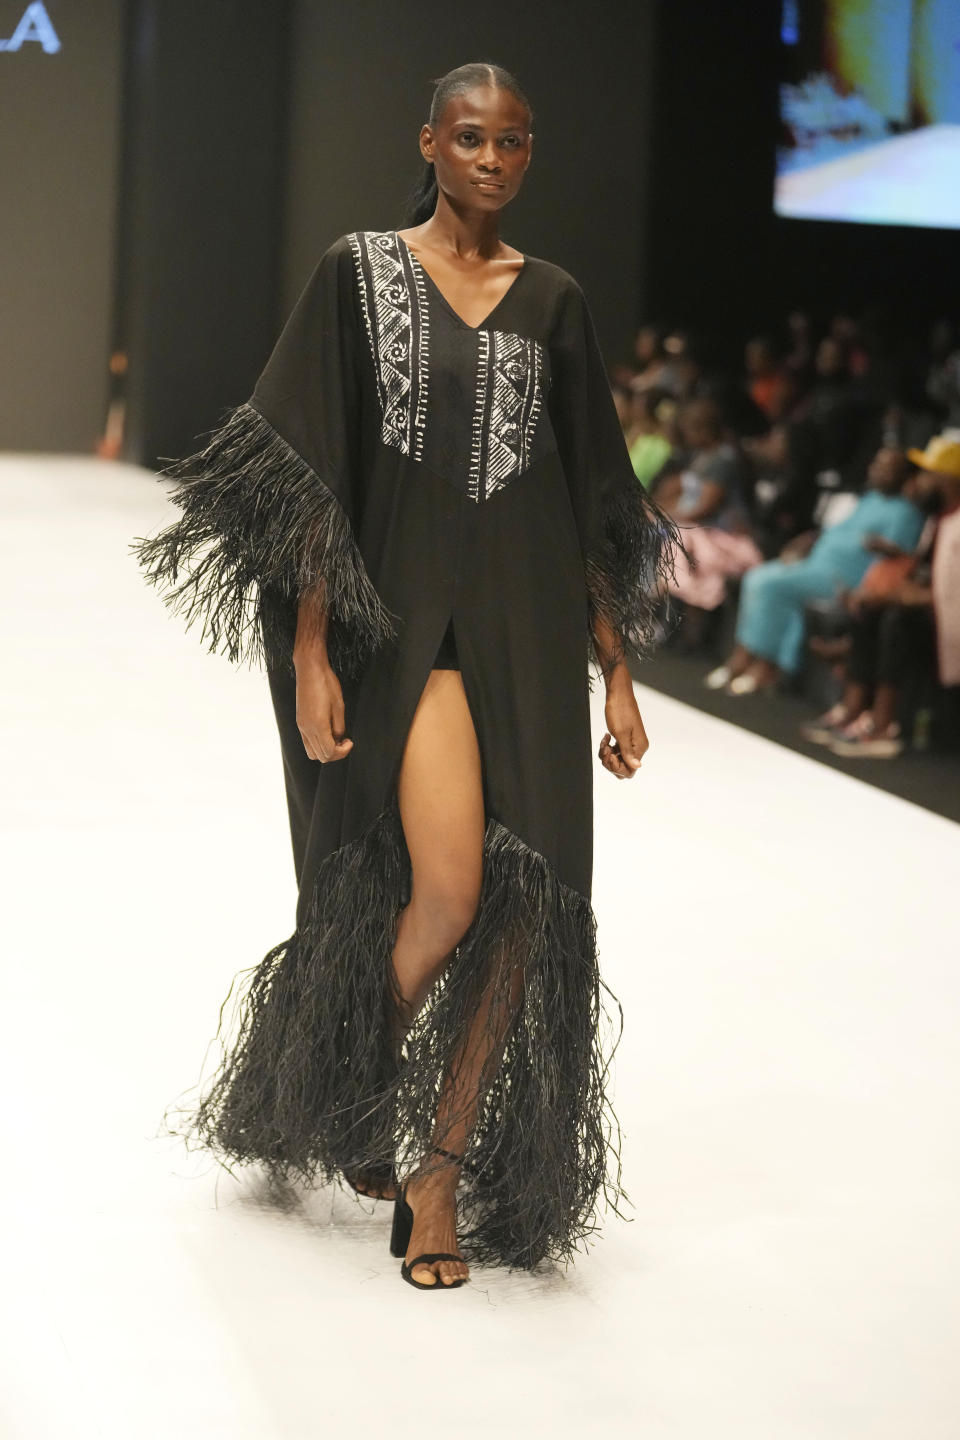 A model displays a creation by Cynthia Abila during the Lagos Fashion Week in Lagos, Nigeria, Thursday, Oct. 26, 2023. Africa's fashion industry is rapidly growing to meet local and international demands but a lack of adequate investment still limits its full potential, UNESCO said Thursday in its new report released at this year's Lagos Fashion Week show. (AP Photo/Sunday Alamba)